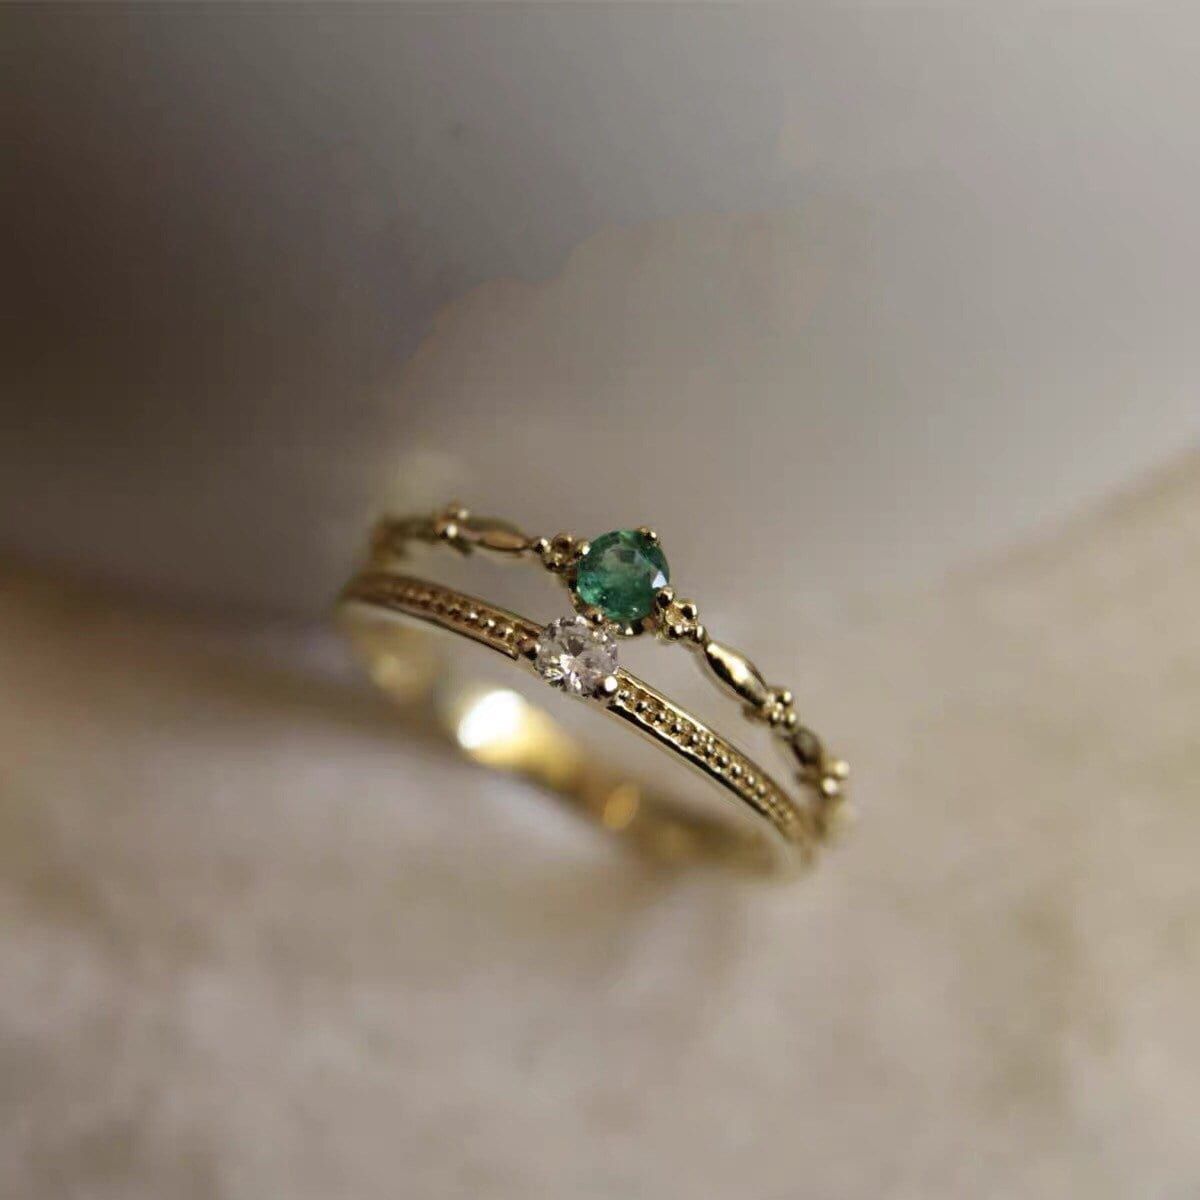 The Timeless Elegance of Emerald Jewelry